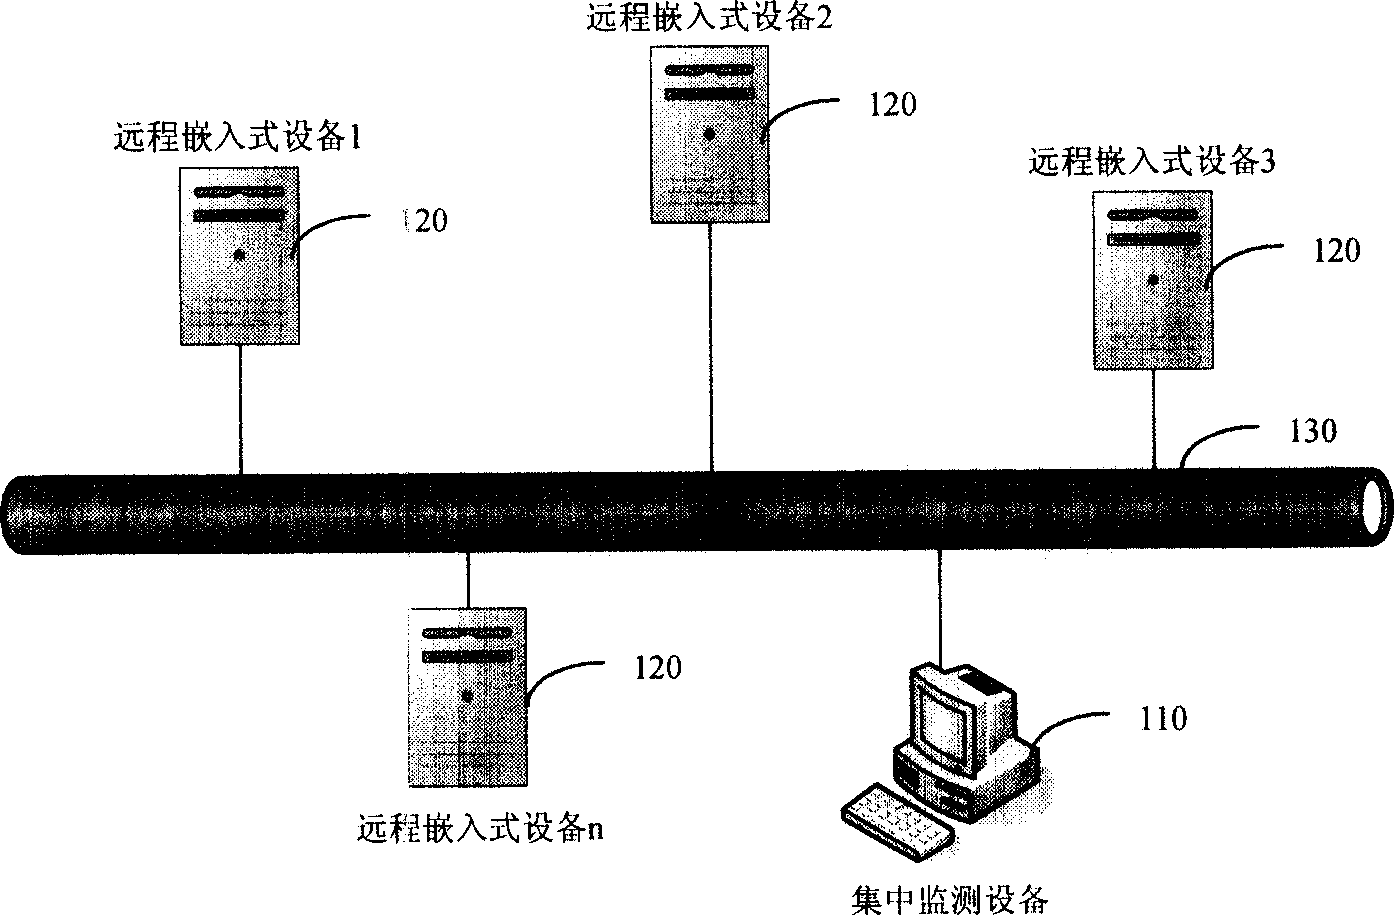 Method for real-time monitoring remote embedded system